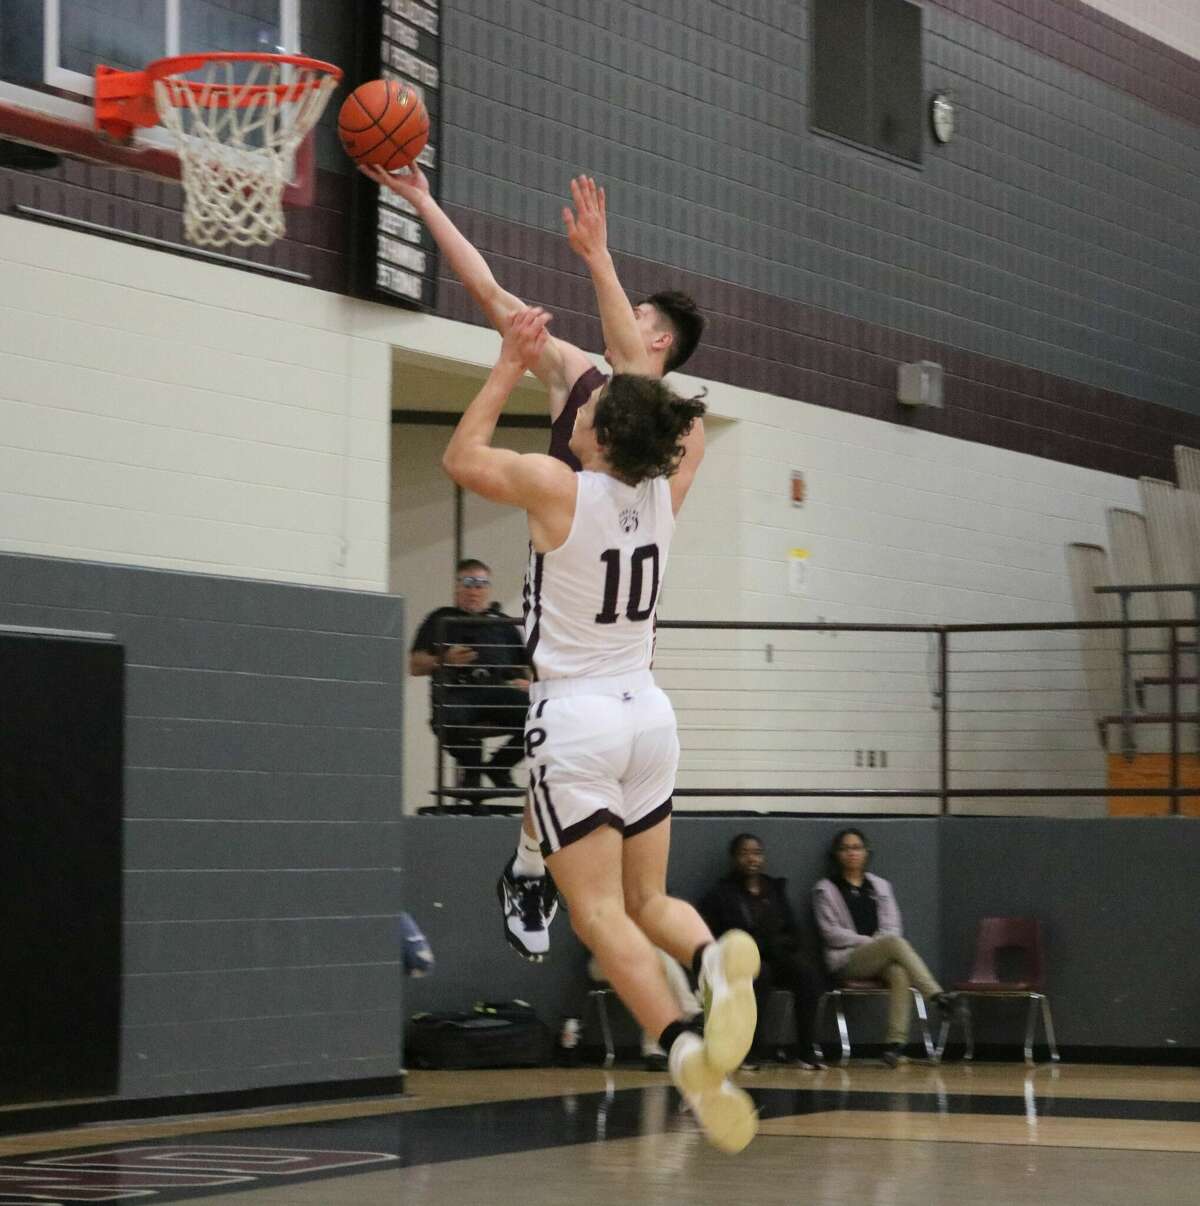 Deer Park's Ryan Clemons attempts to score two of his game-high 17 points in the second period Saturday afternoon after he stole the ball. But he missed and the game stayed tied at 18-18. The Pearland defender is Luke Stano.